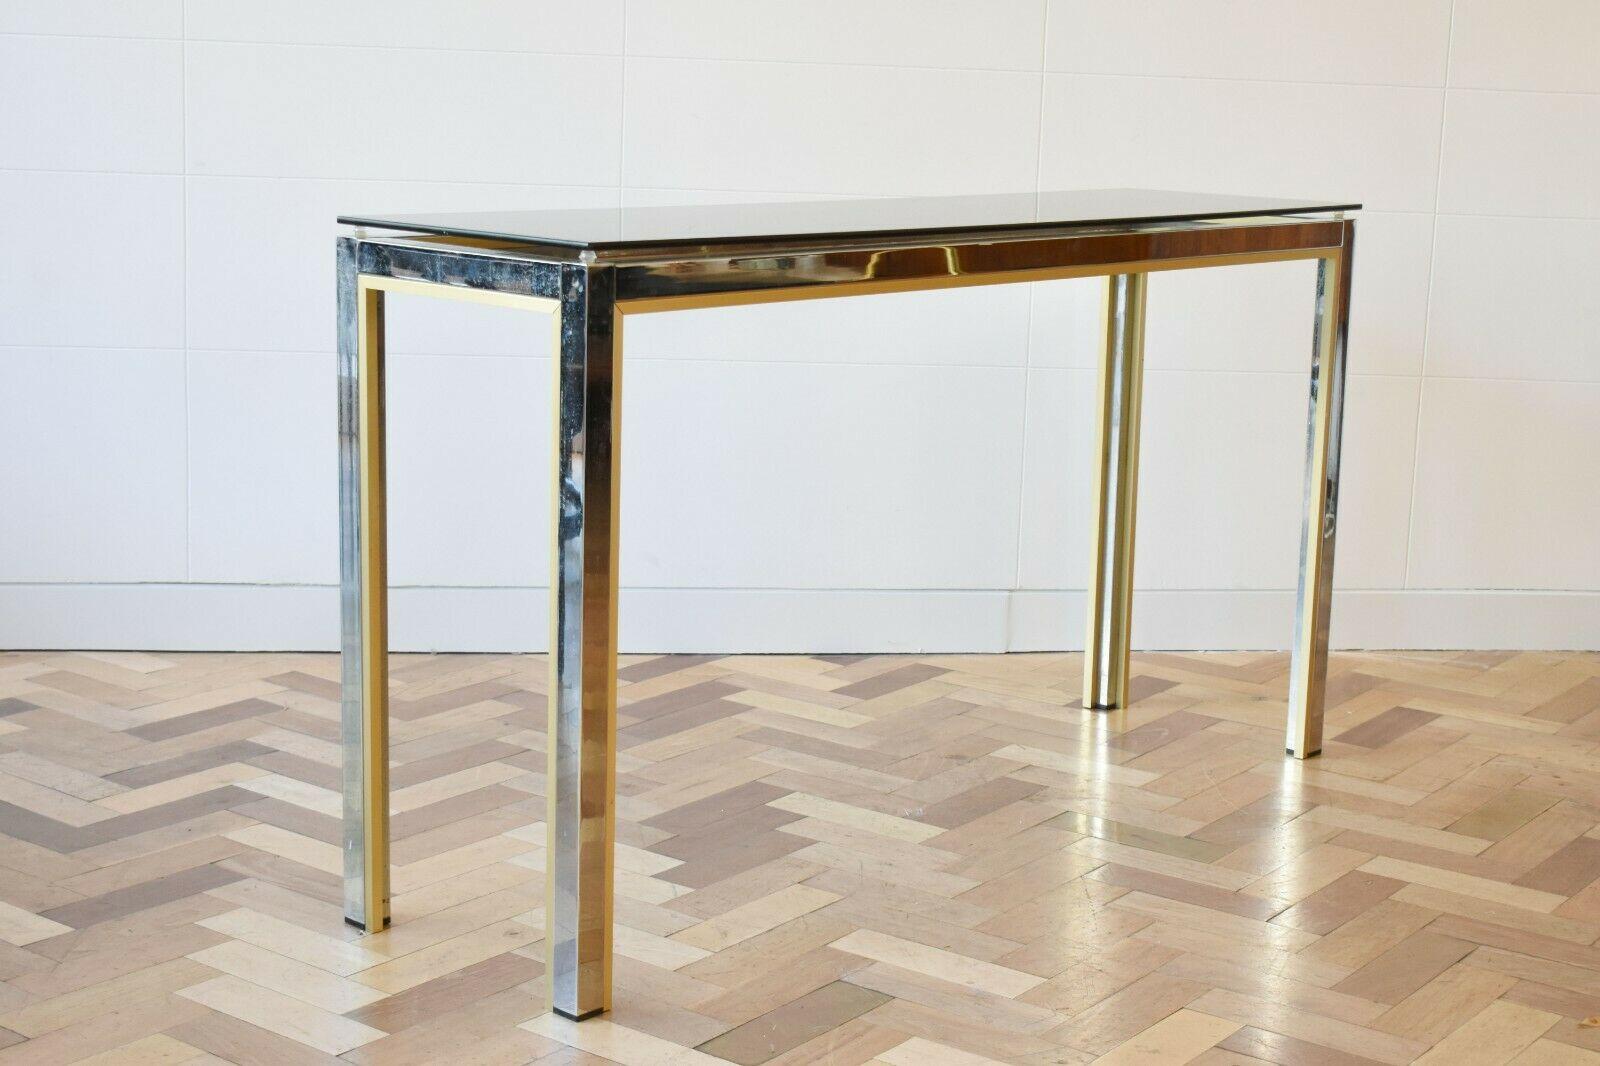 Mid-century 1970s Italian chrome and brass console table by Romeo Rega, with glass top.

A beautiful and sleek design, remnant of the Hollywood Regency period. 

About the designer: 

Born in 1904, Italian designer Romeo Rega is one of several